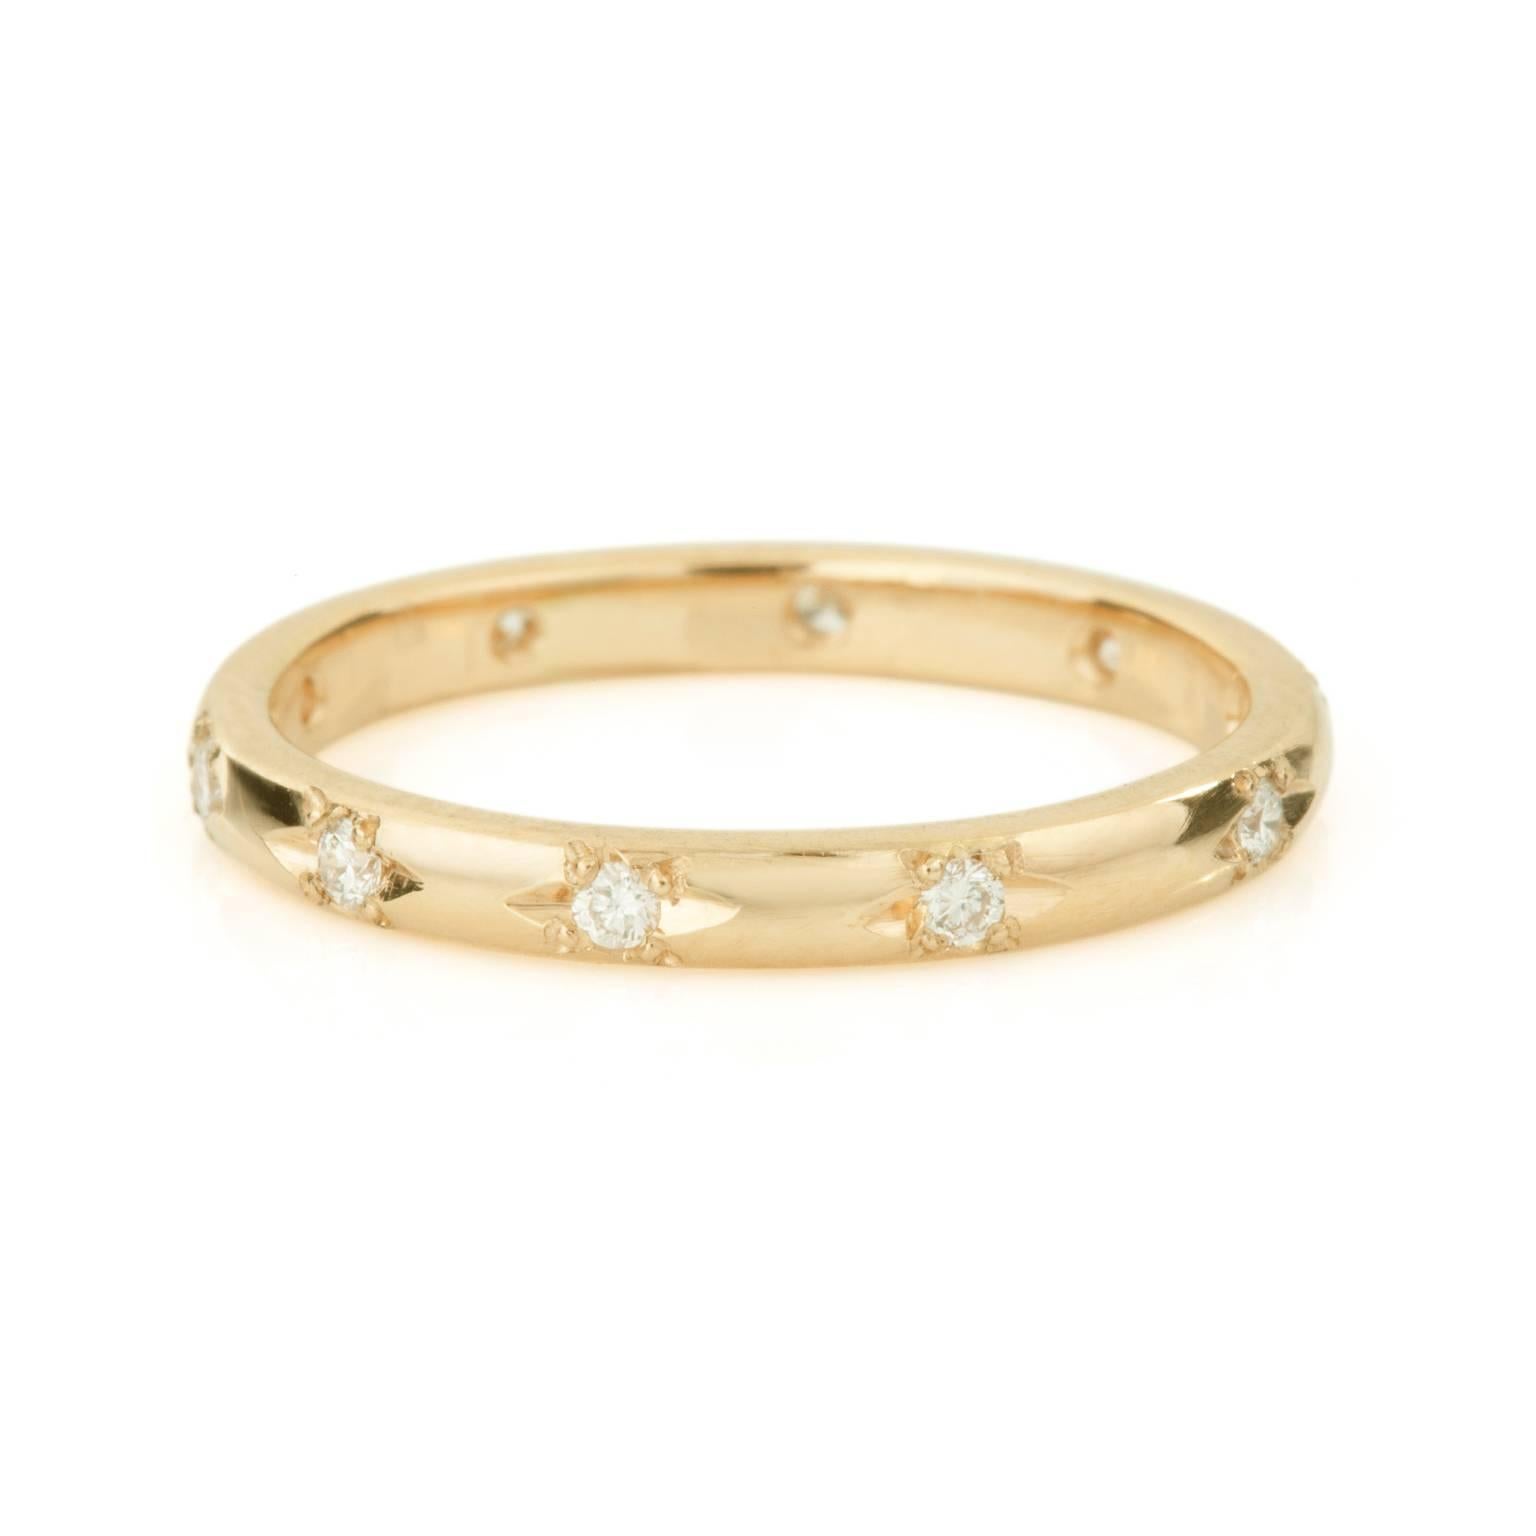 A special addition to the Firma collection, the Stella Eternity Ring is subtly dotted with diamonds all the way round. Created in 18ct gold this ring can be worn everyday alongside an engagement ring and wedding band, or layered with an existing